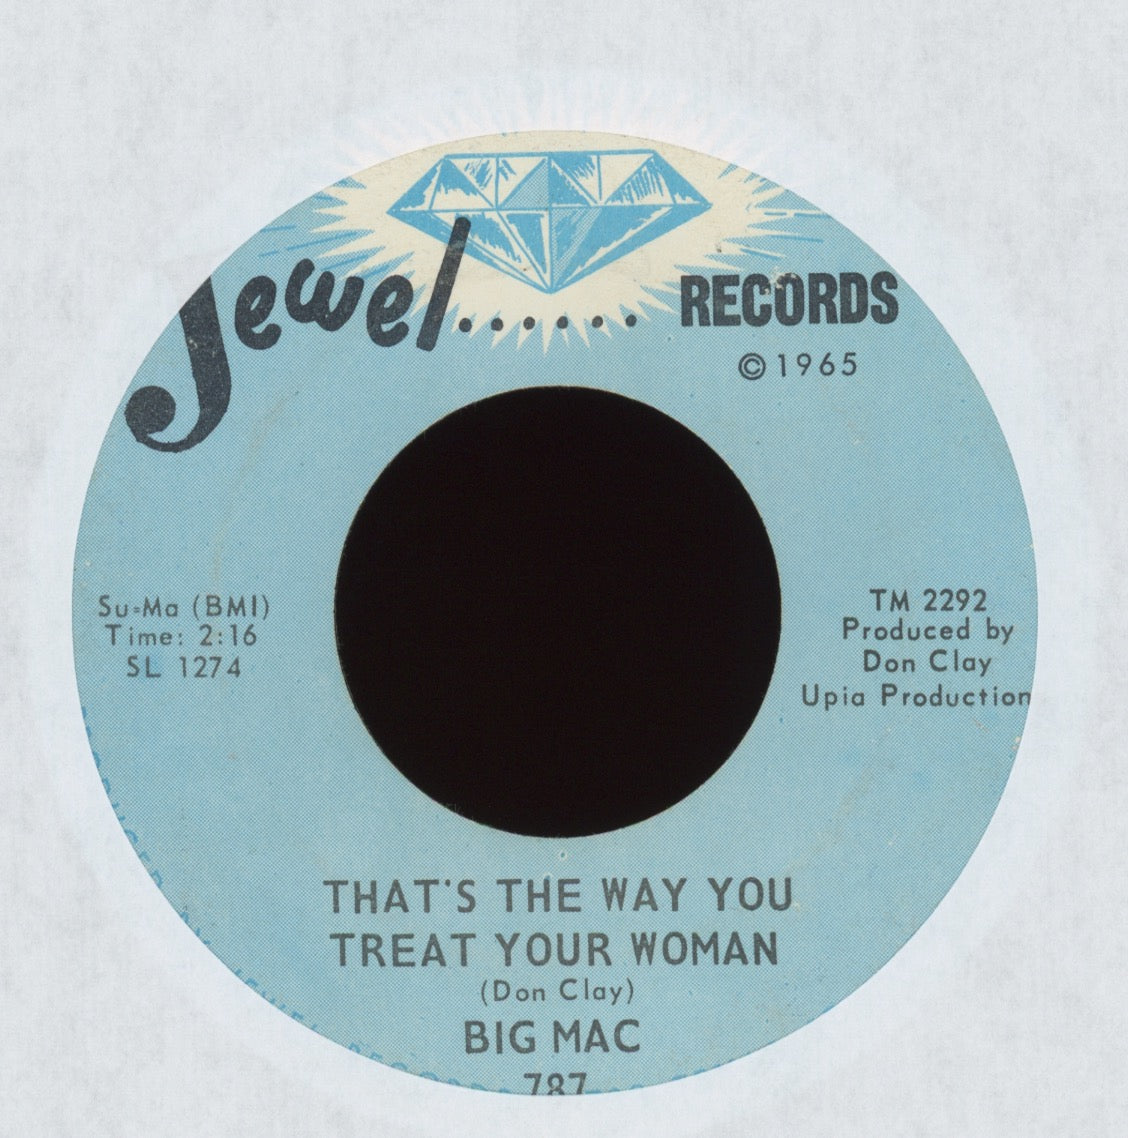 Big Mac - That's The Way You Treat Your Woman on Jewel